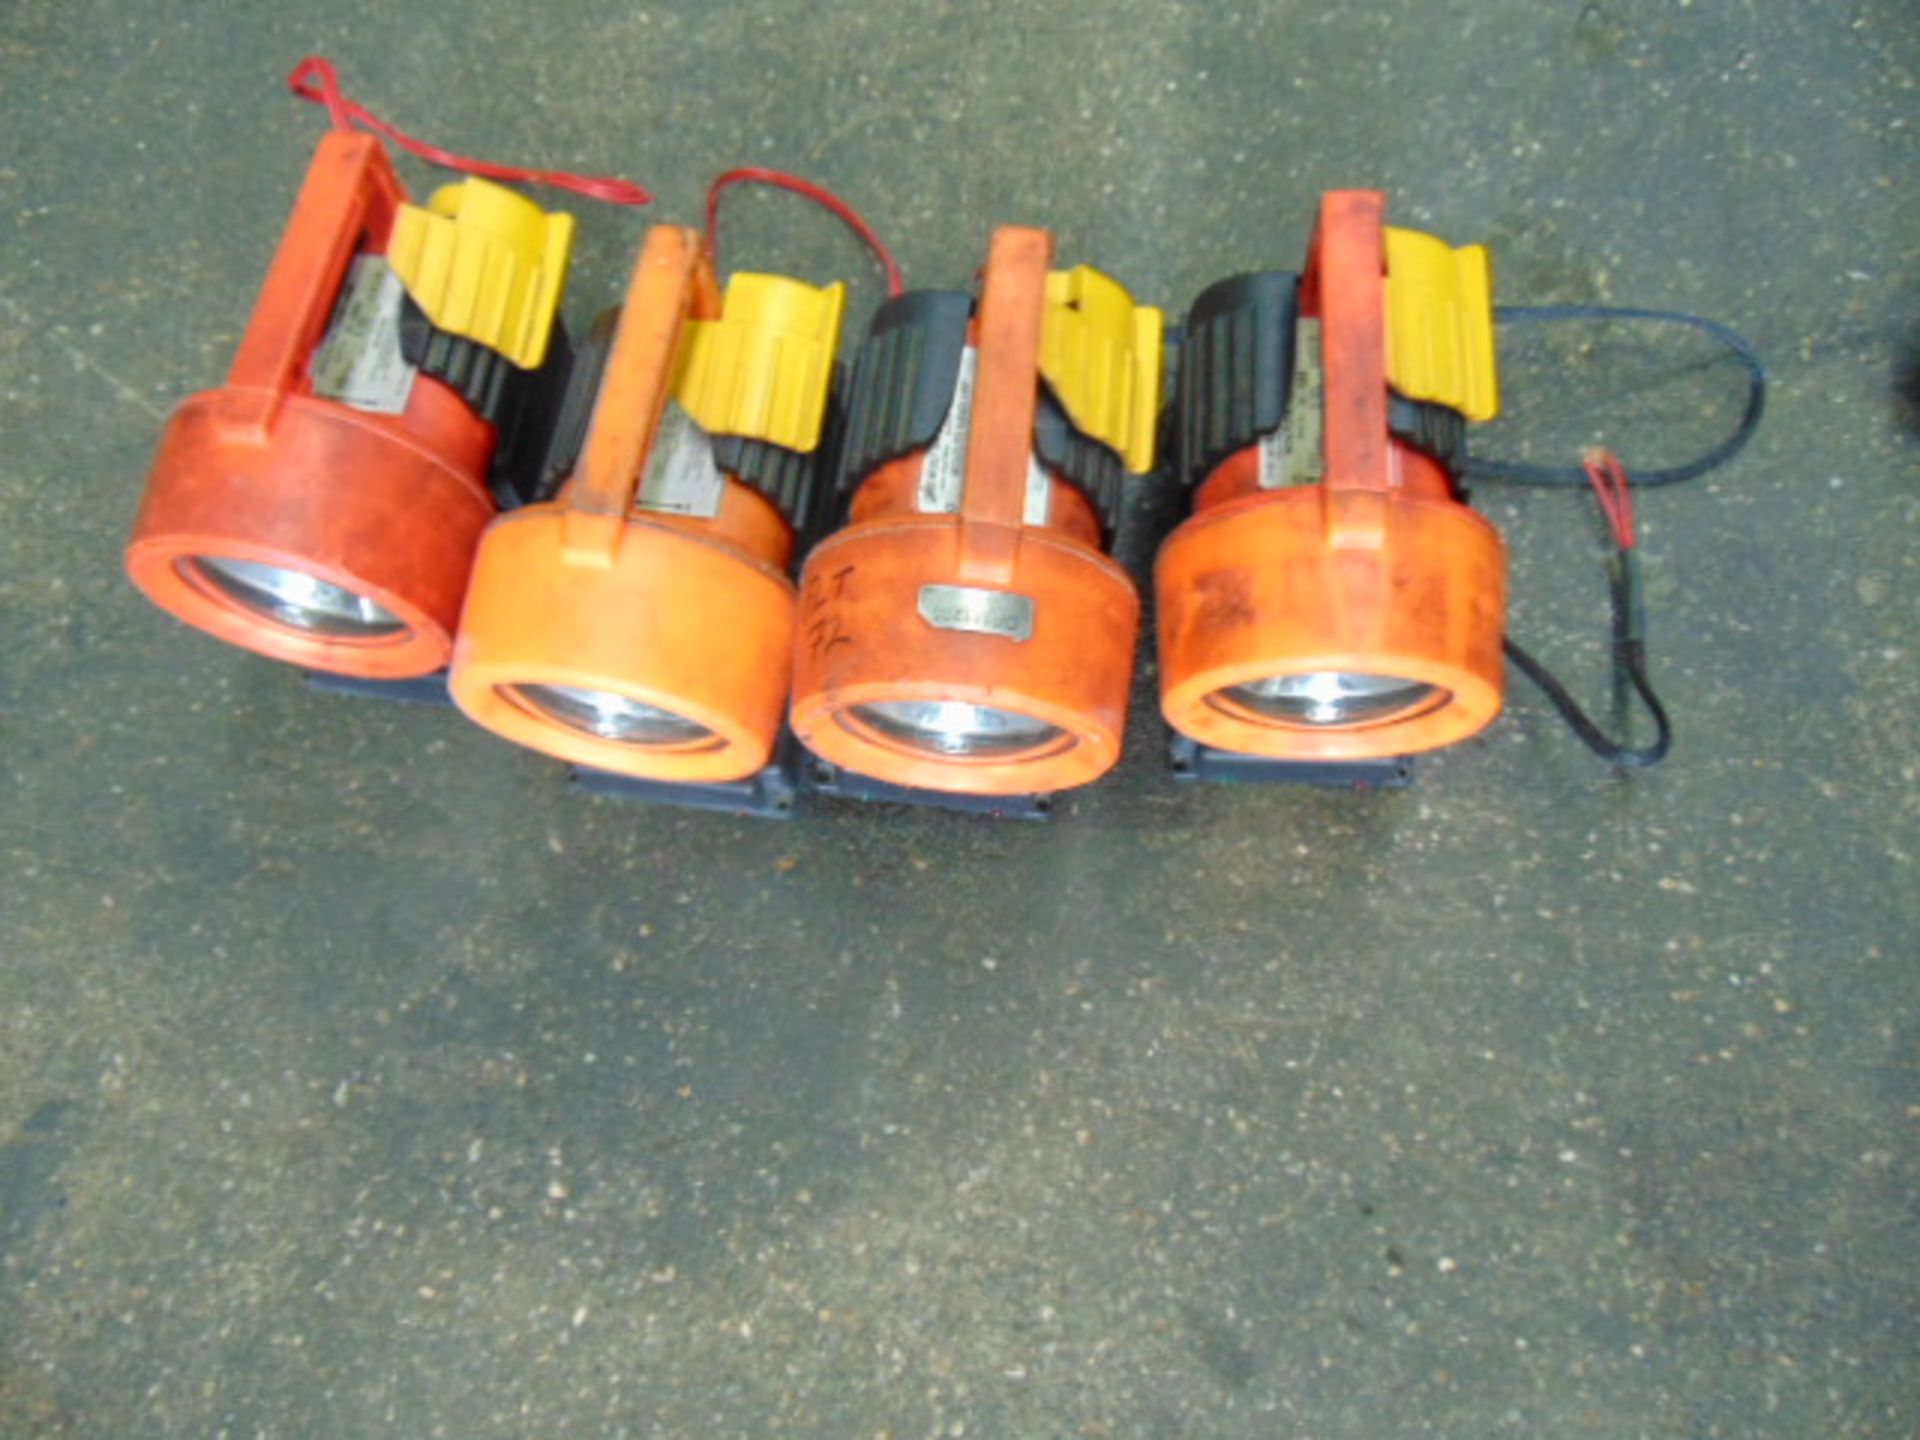 4 x Wolflite H-SB8 Handlamps with Chargers